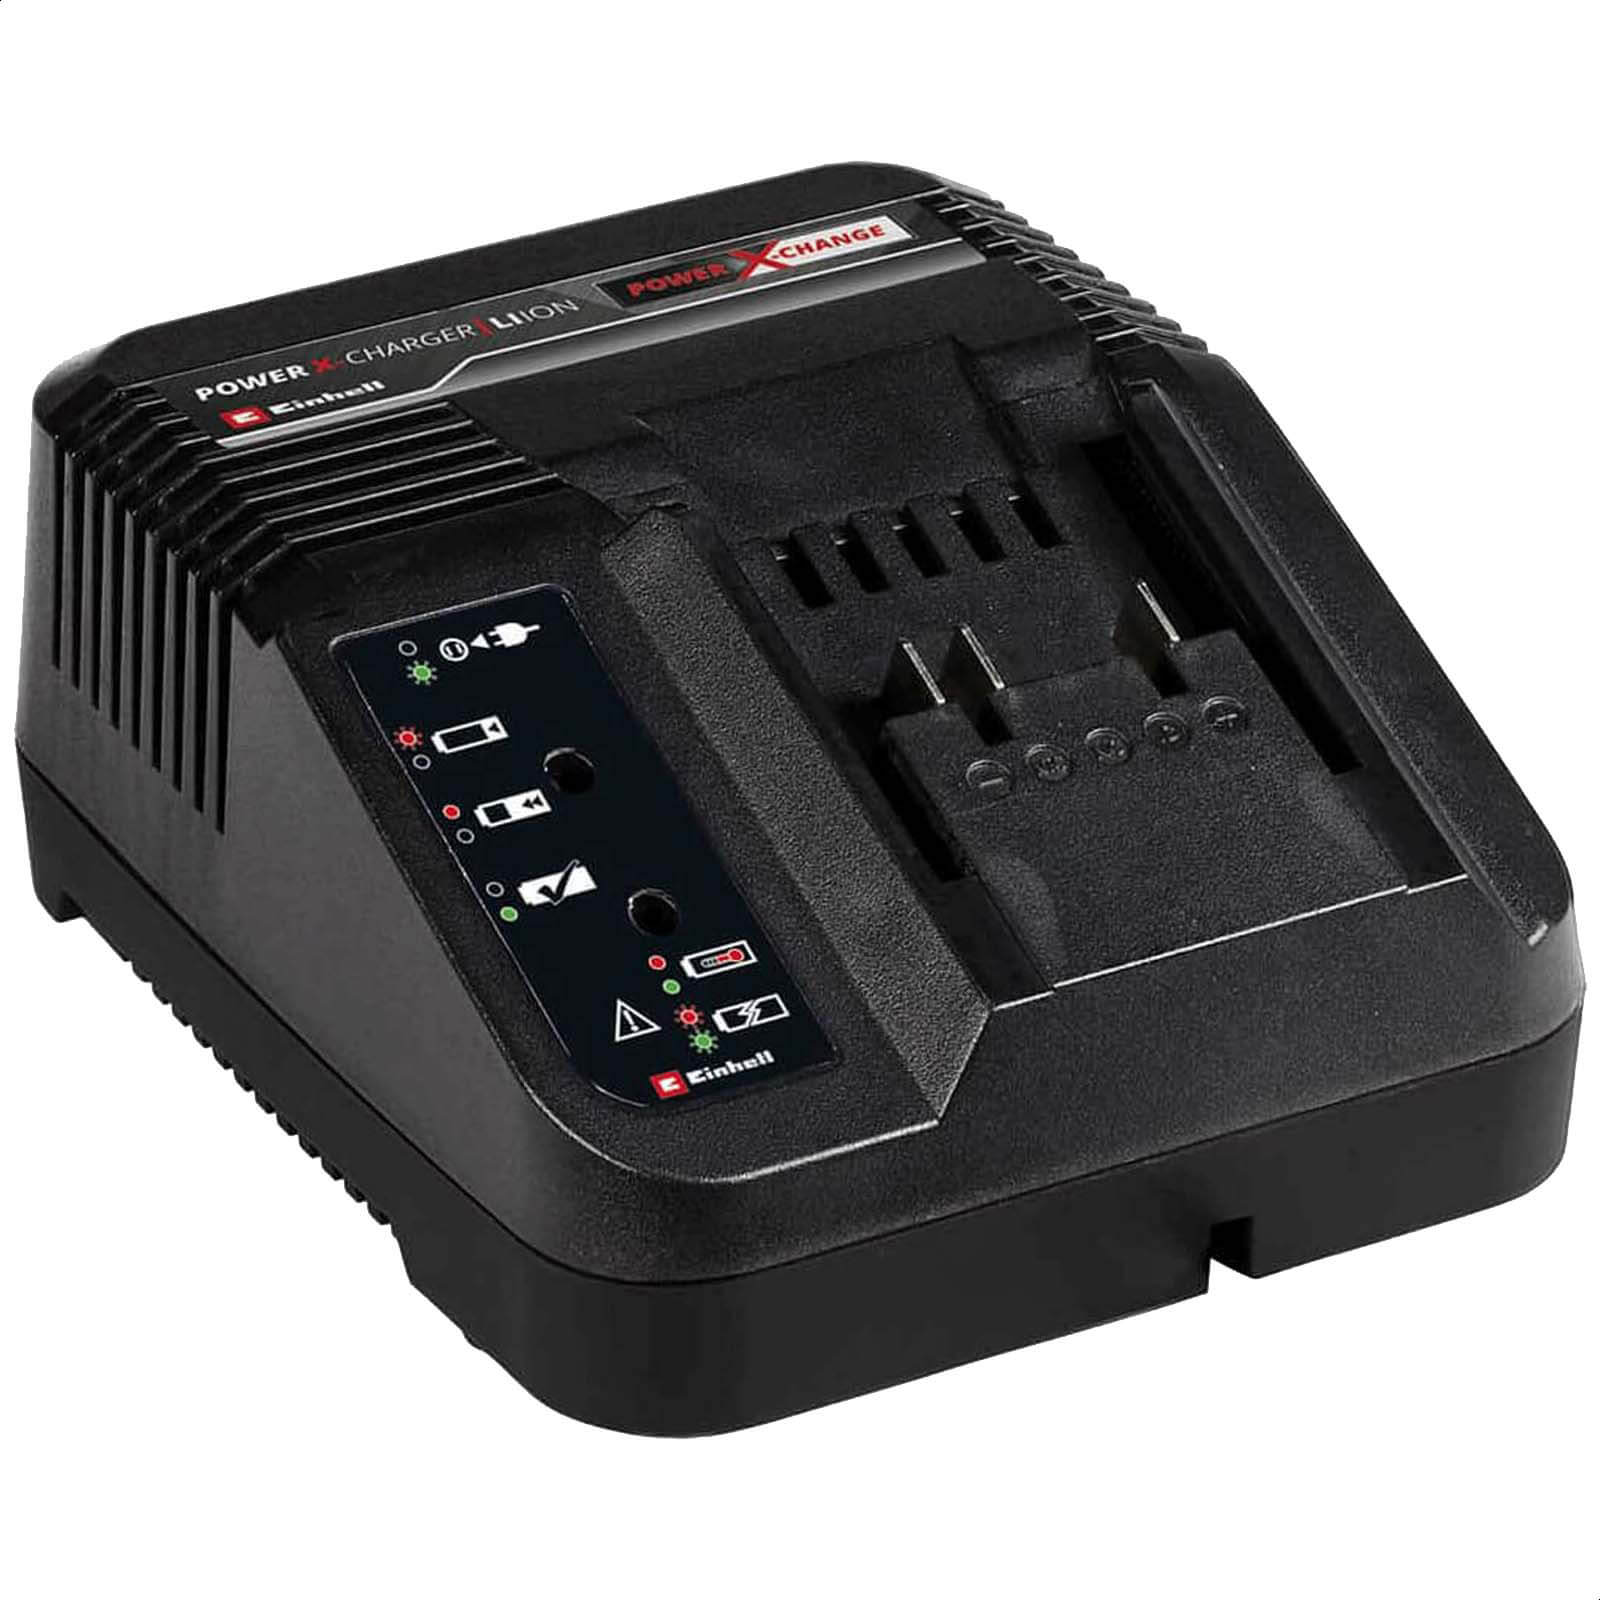 Image of Einhell Genuine Power X-Change 18v Cordless Battery Charger